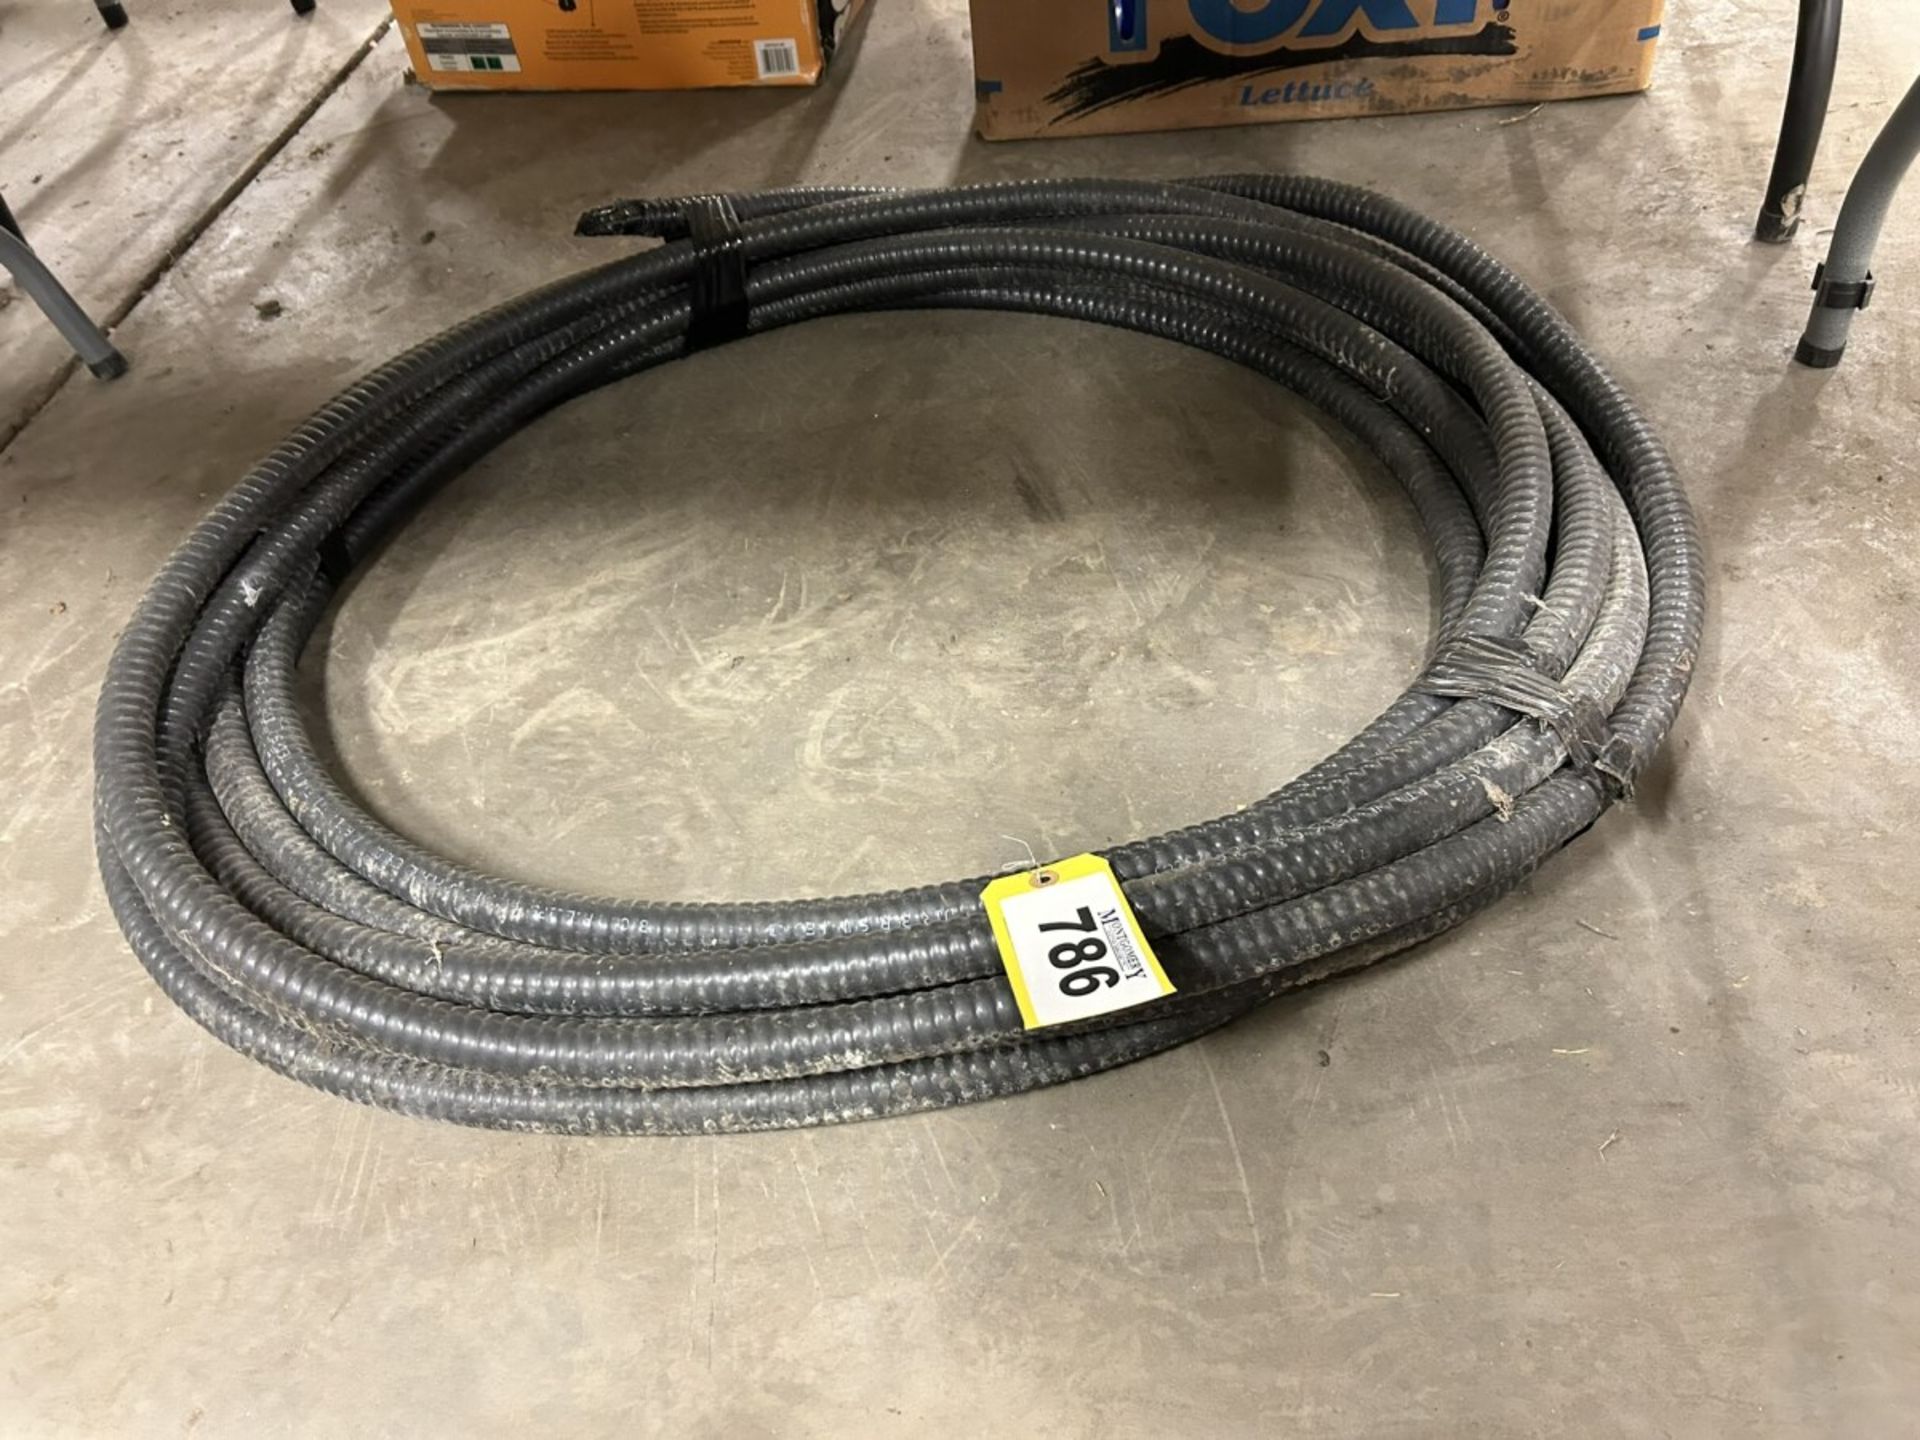 PARTIAL ROLL OF TECK CABLE (4 WIRE)